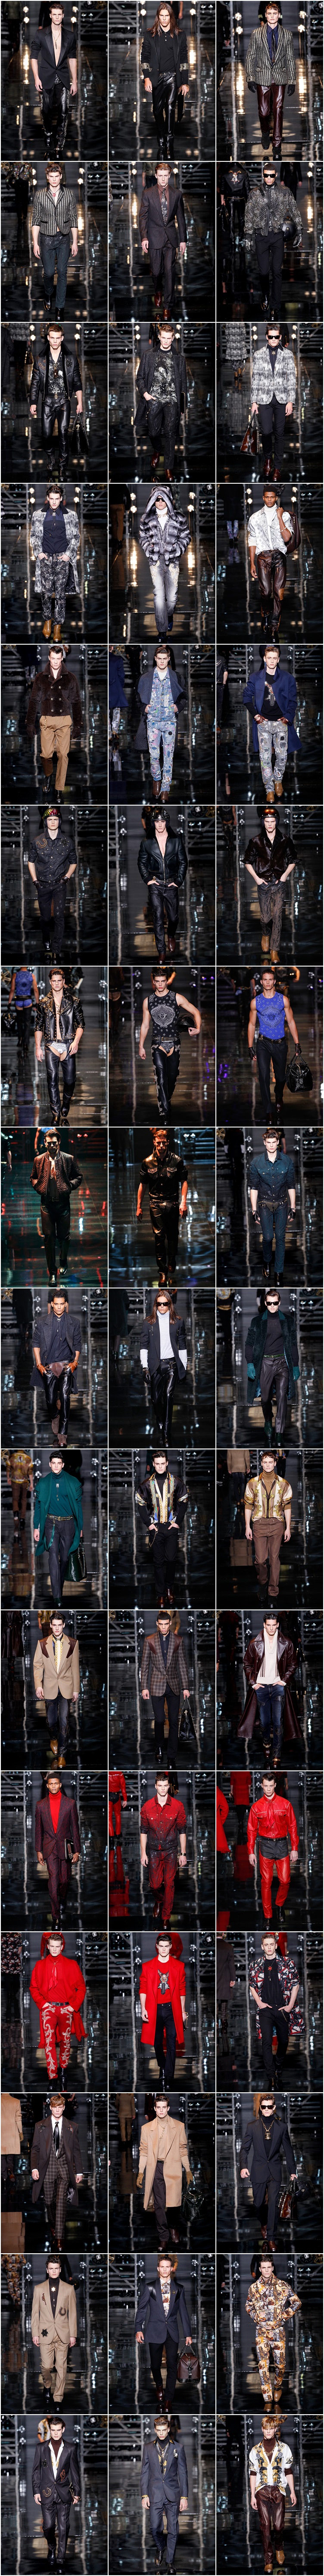 versace-men-fall-winter-2014-collection-fashion4addicts.com